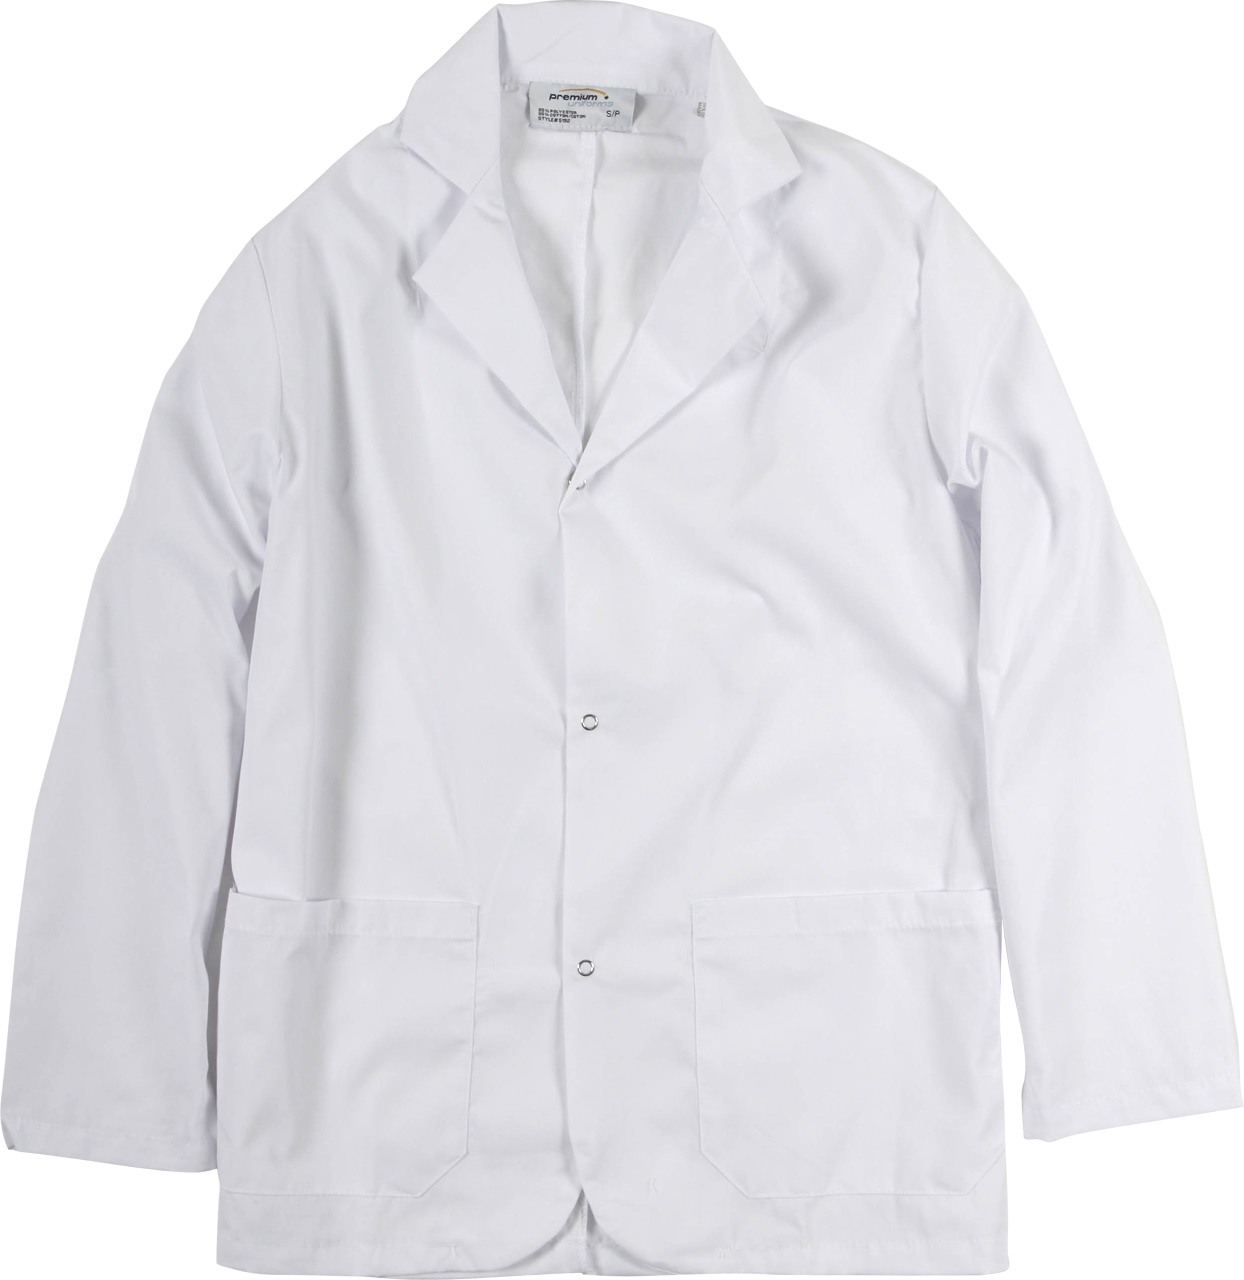 Picture of Premium Uniforms 2 Pocket Poplin Counter Coat With Snaps